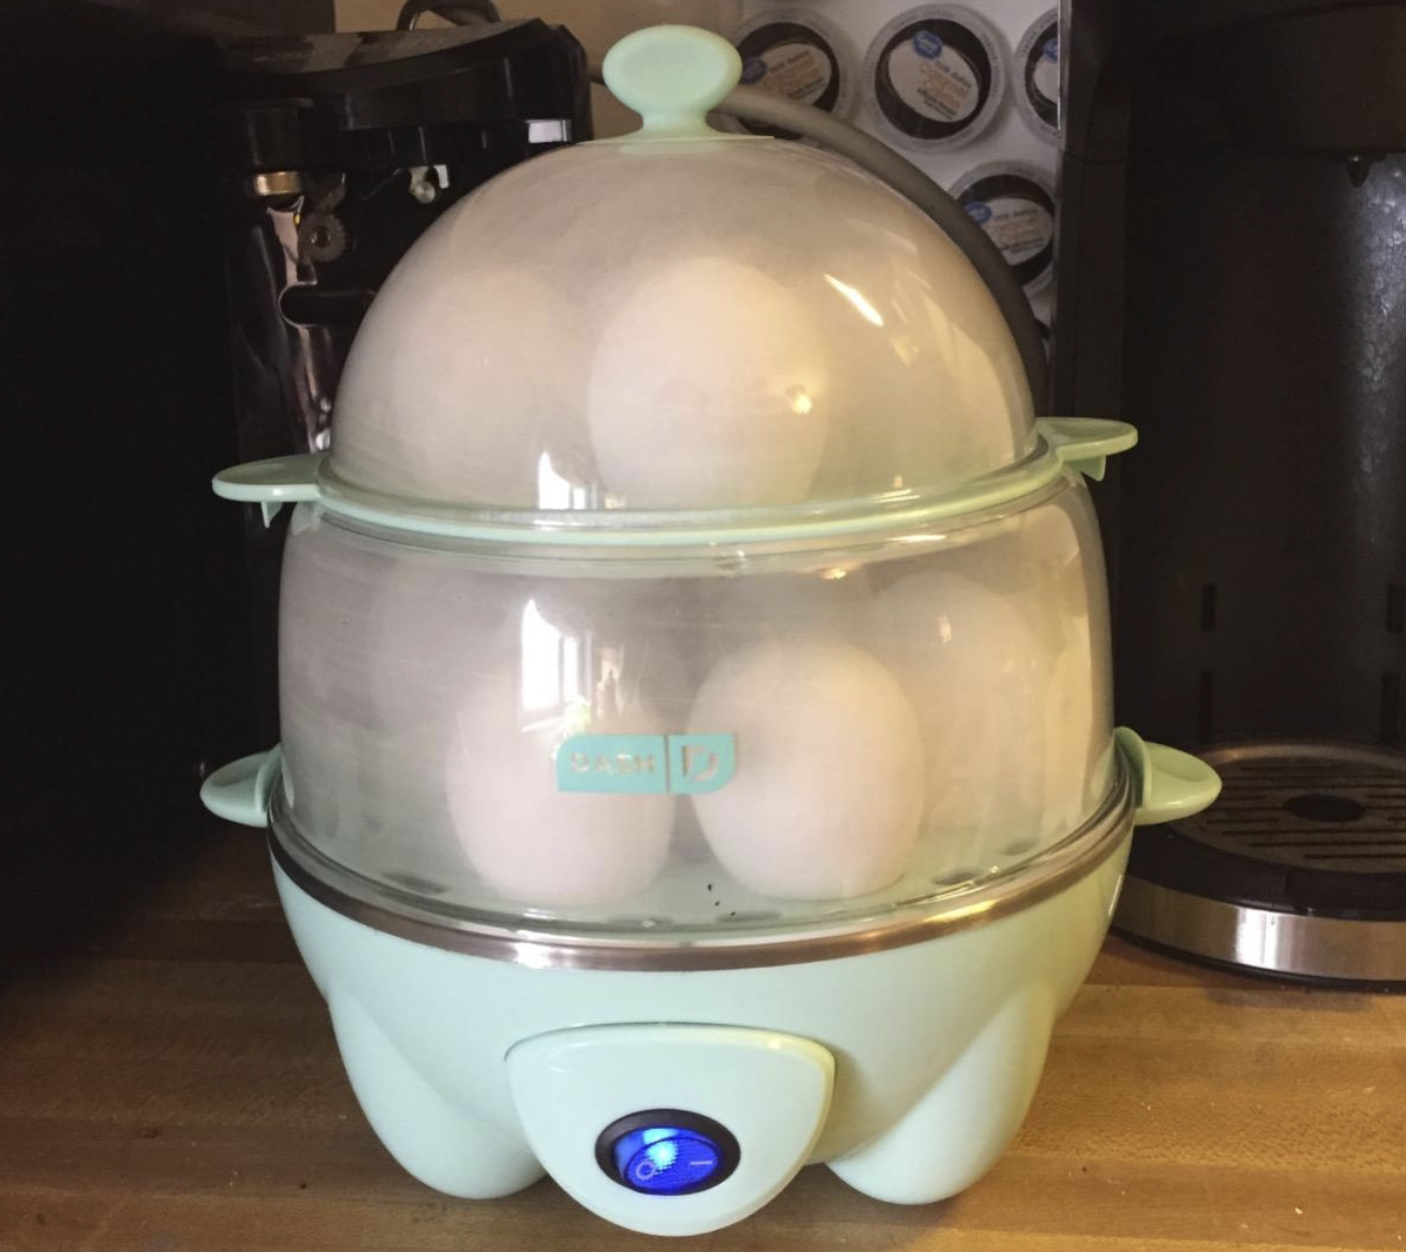 An egg cooker with two tiers that hold six eggs each and a single button for powering on and off